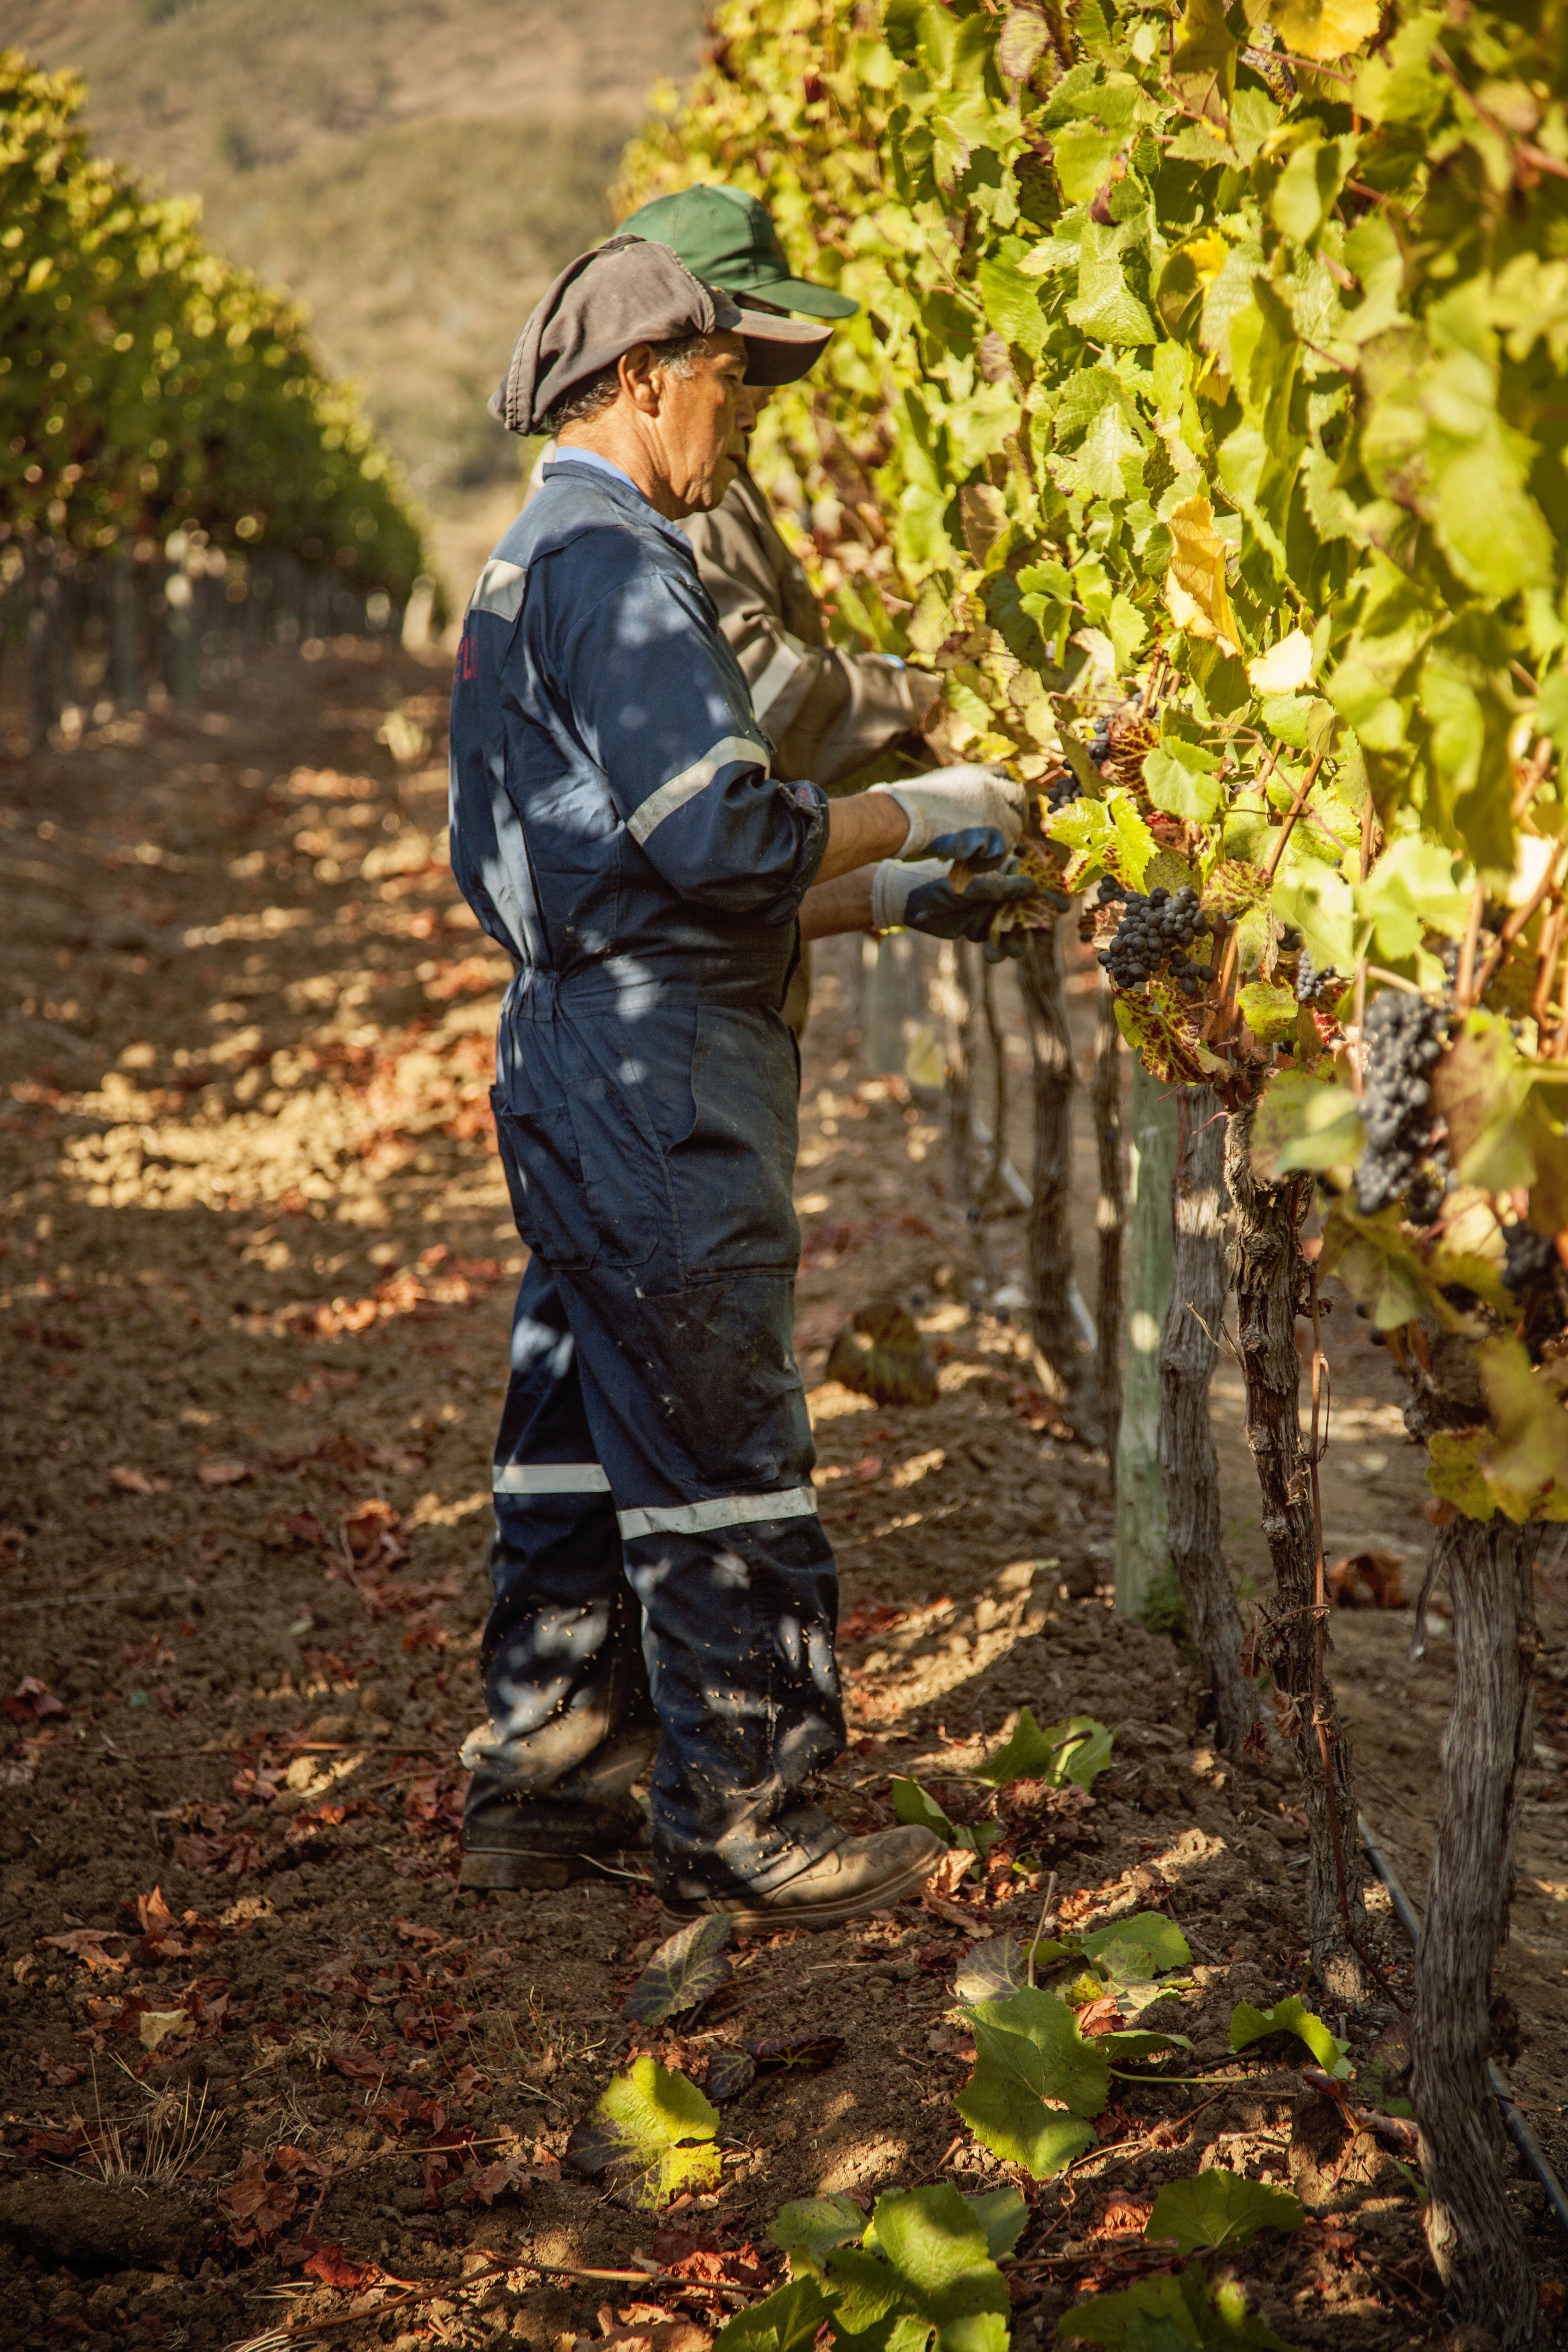 Members of our Chilean team hard at work in the vines harvesting grapes just before COVID lockdowns began.